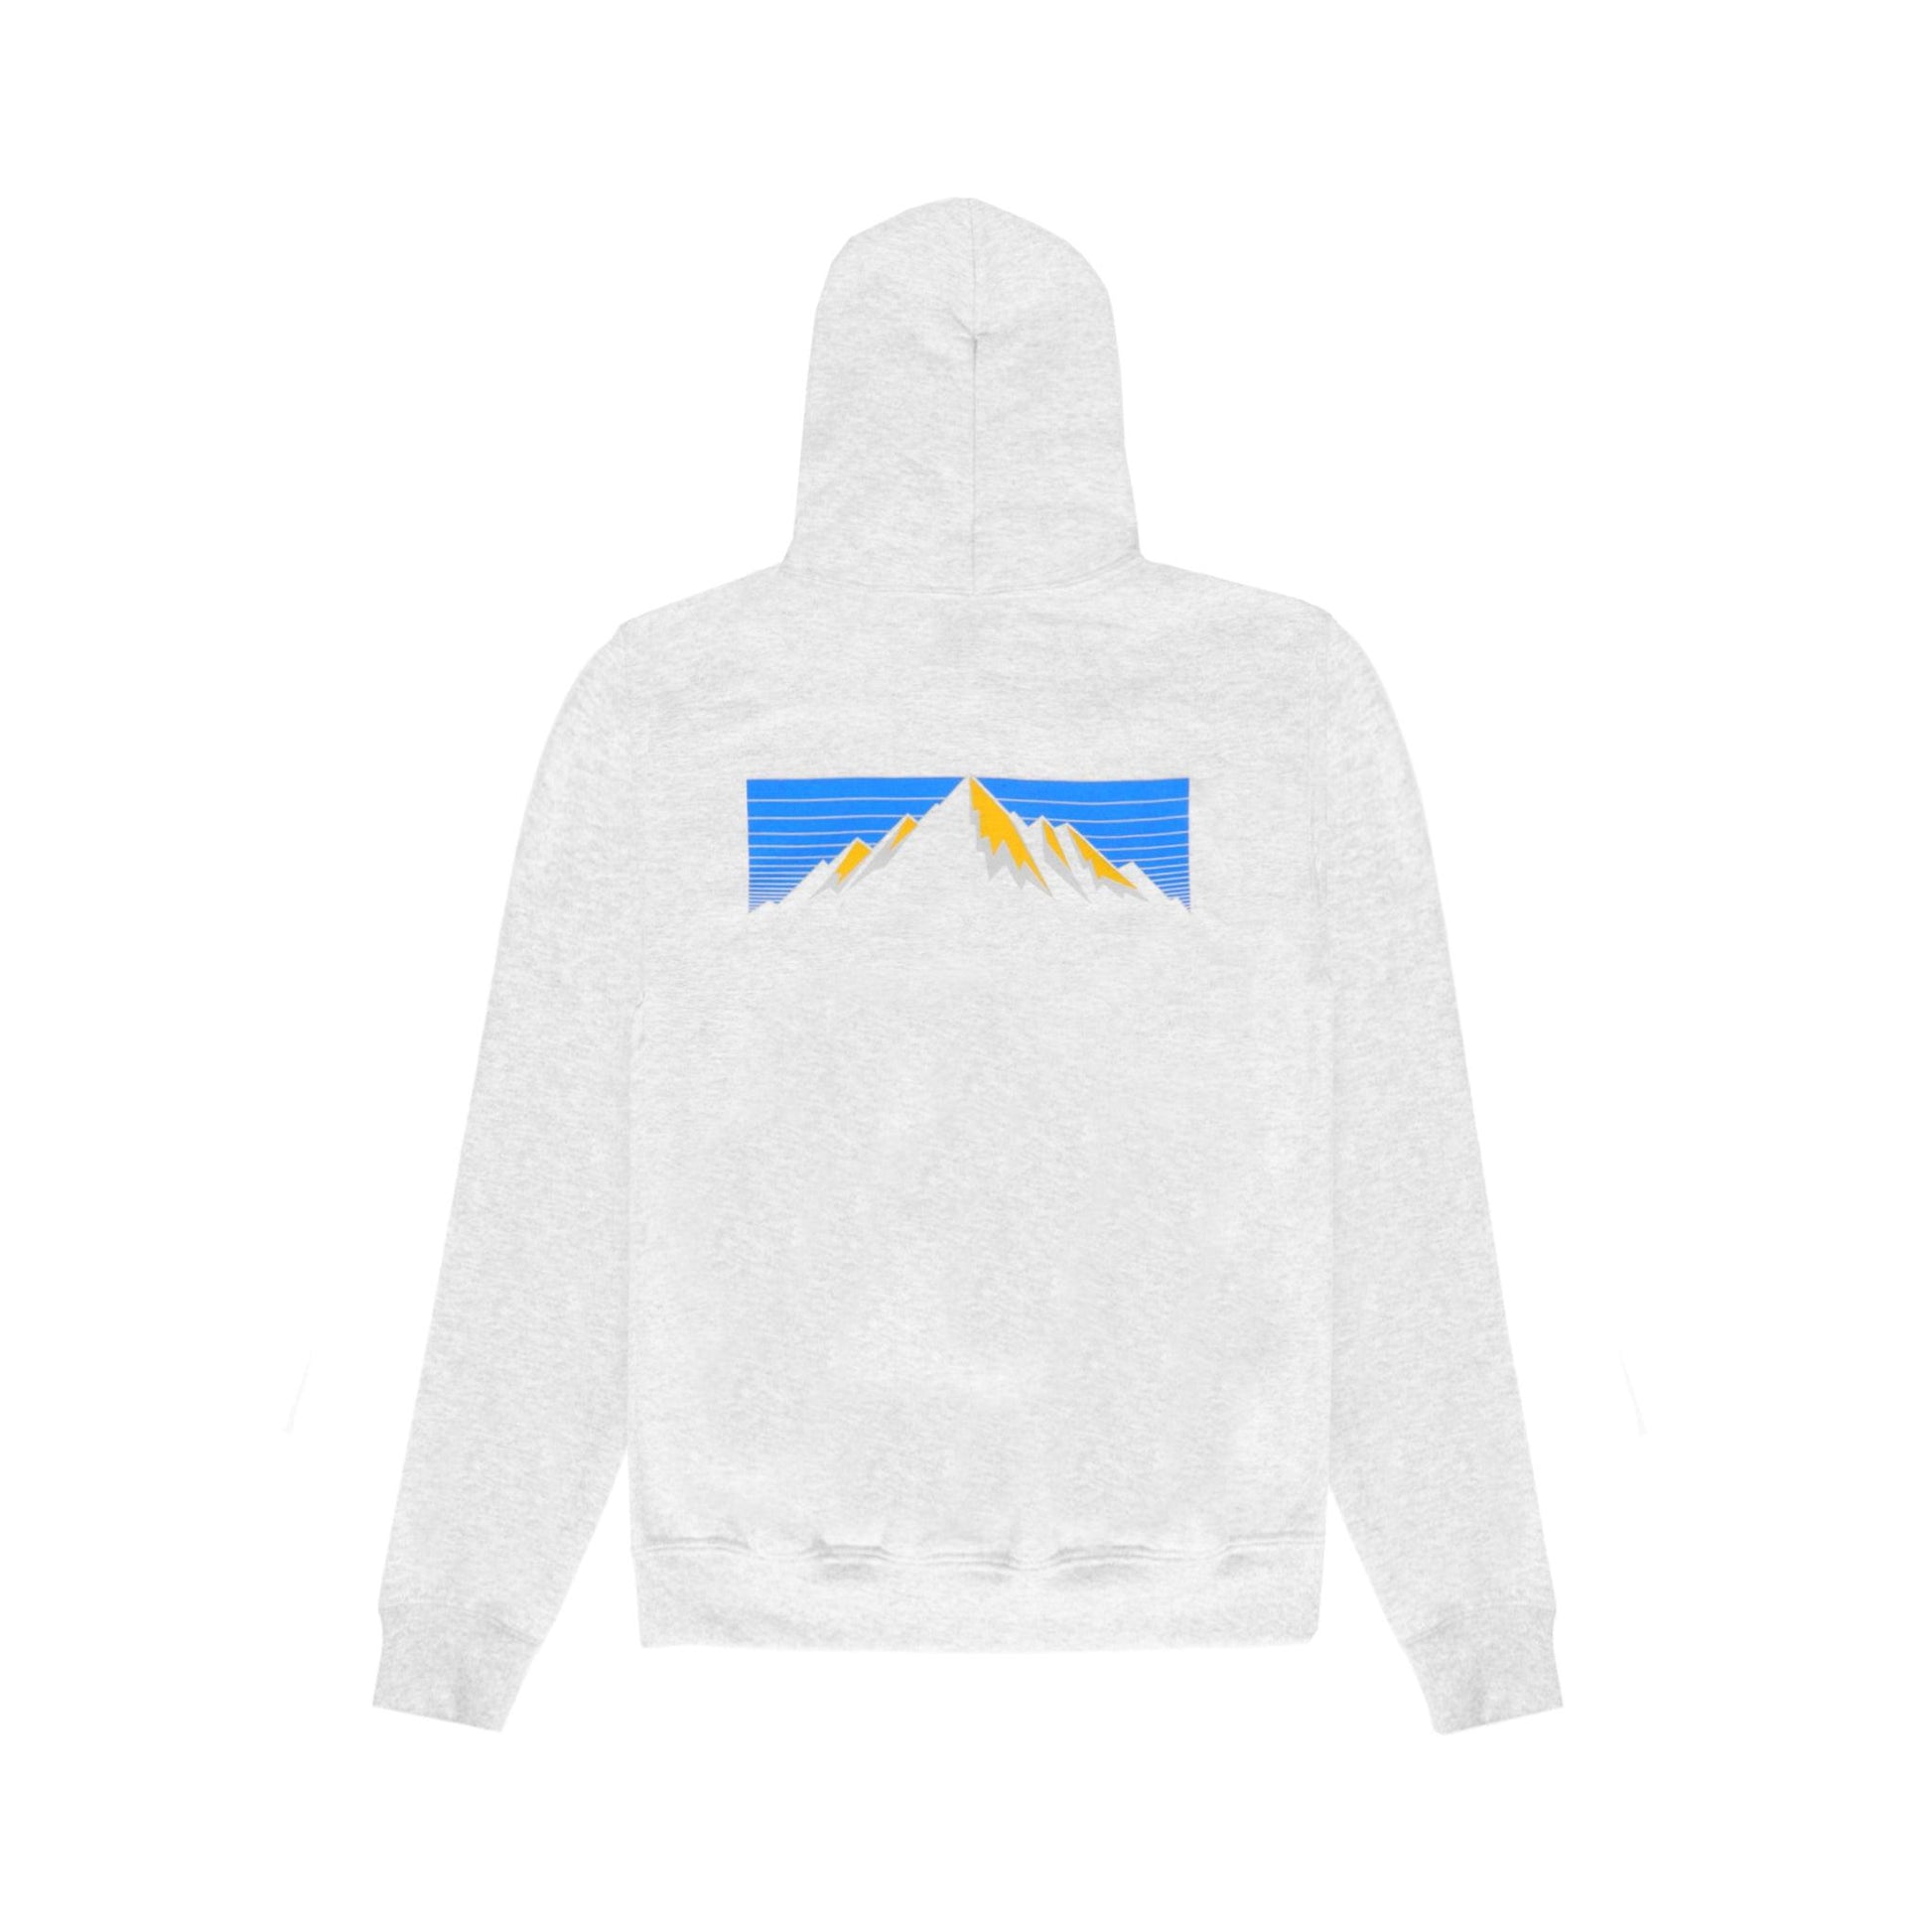 back of hoodie with retro mountain hoodie